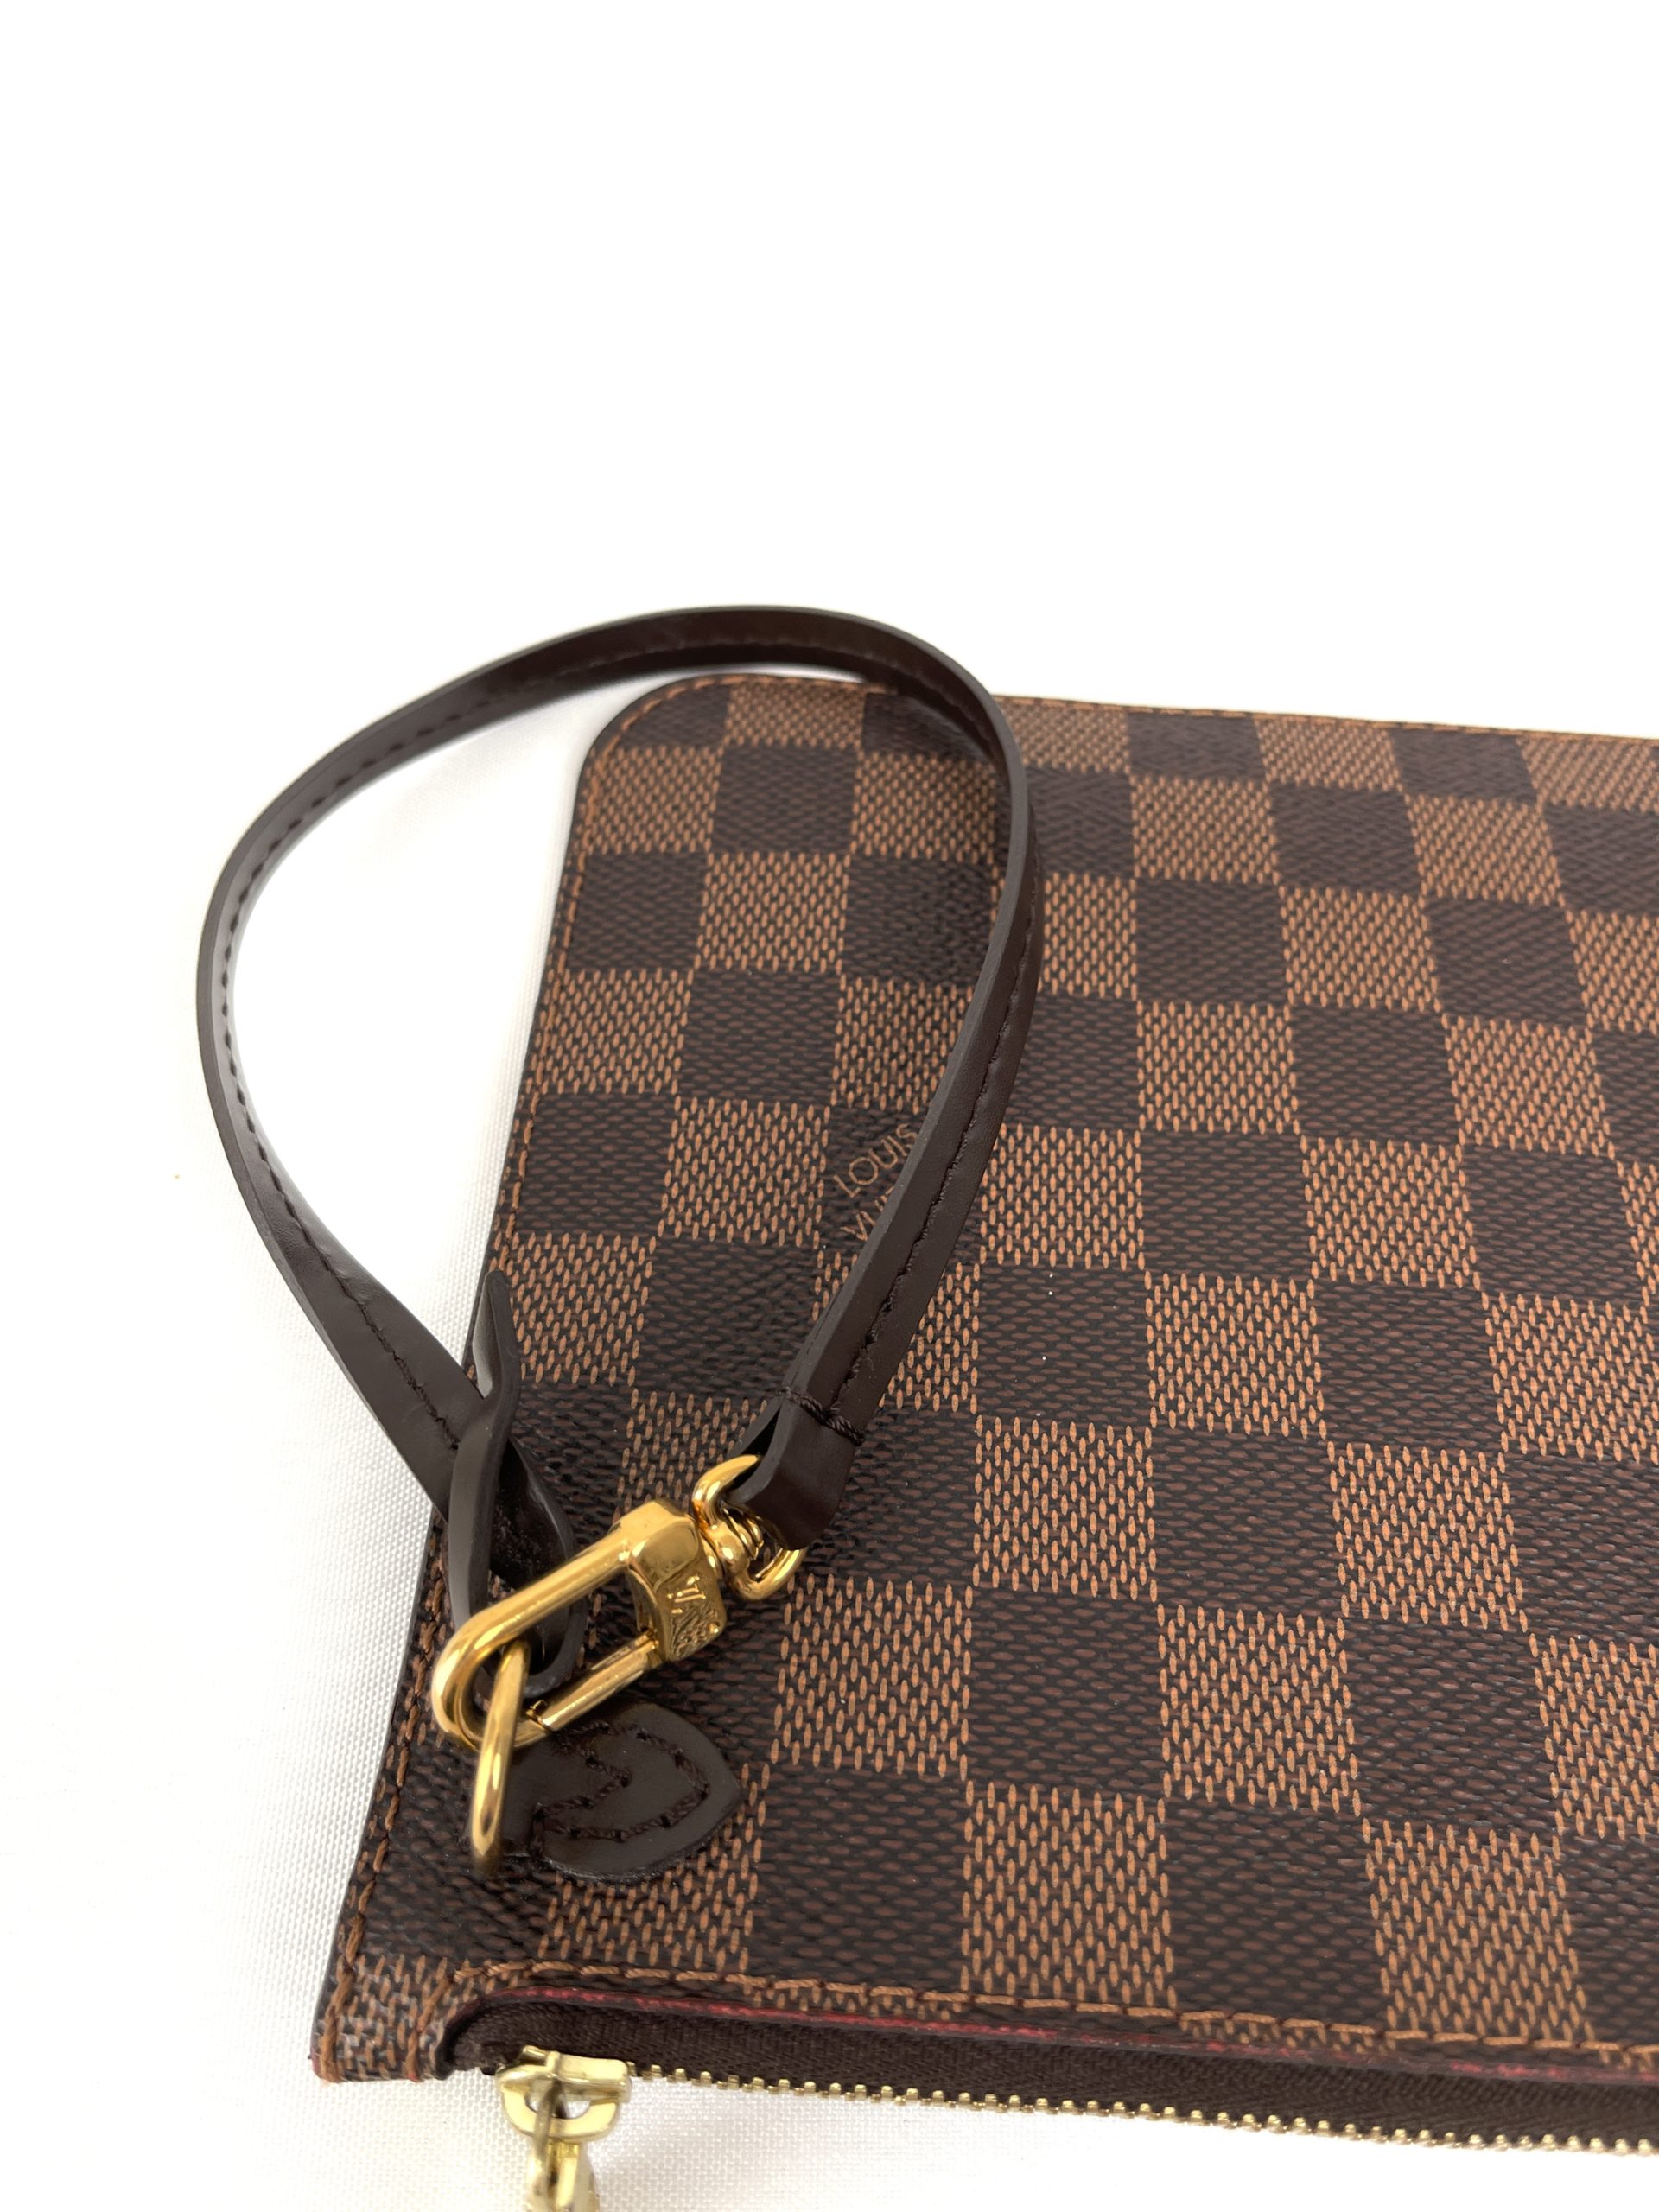 From cerise, to beige and even peony, the Louis Vuitton Neverfull